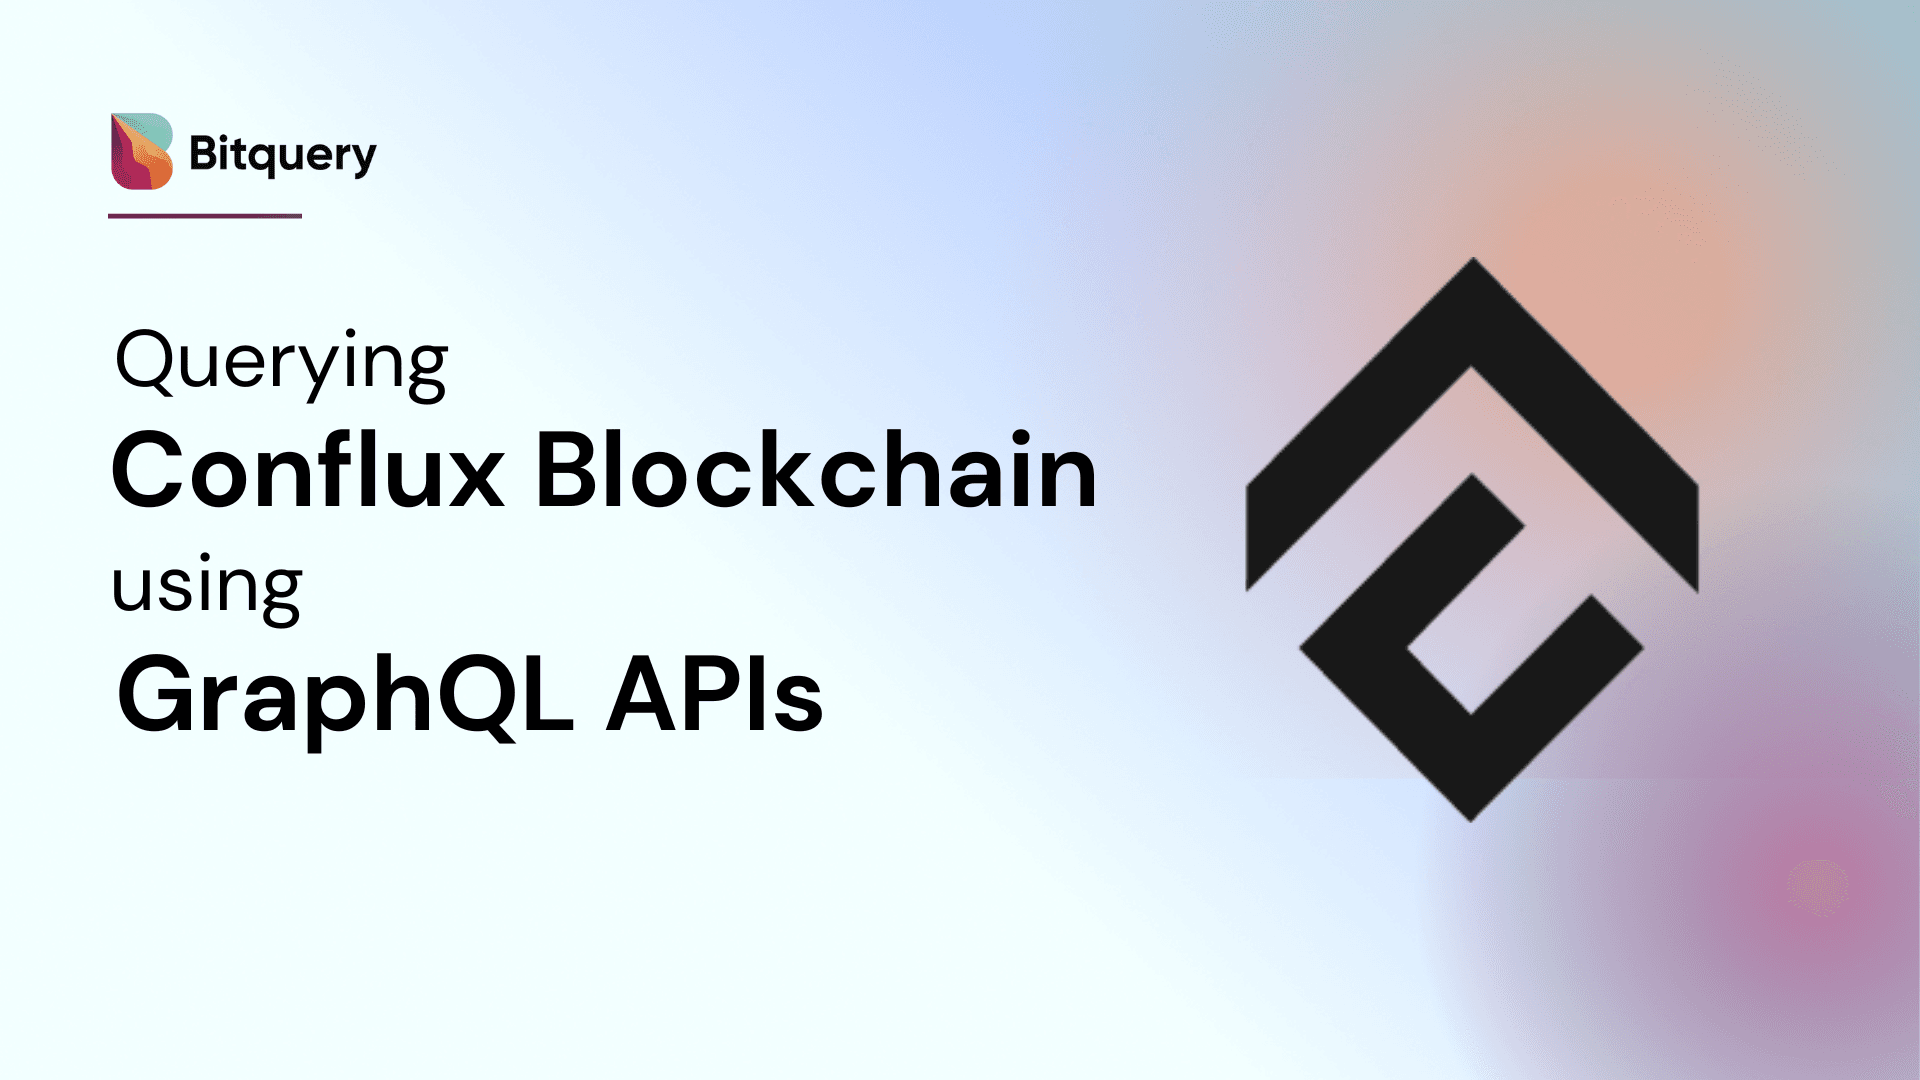 Cover Image for Querying Conflux Blockchain using GraphQL APIs